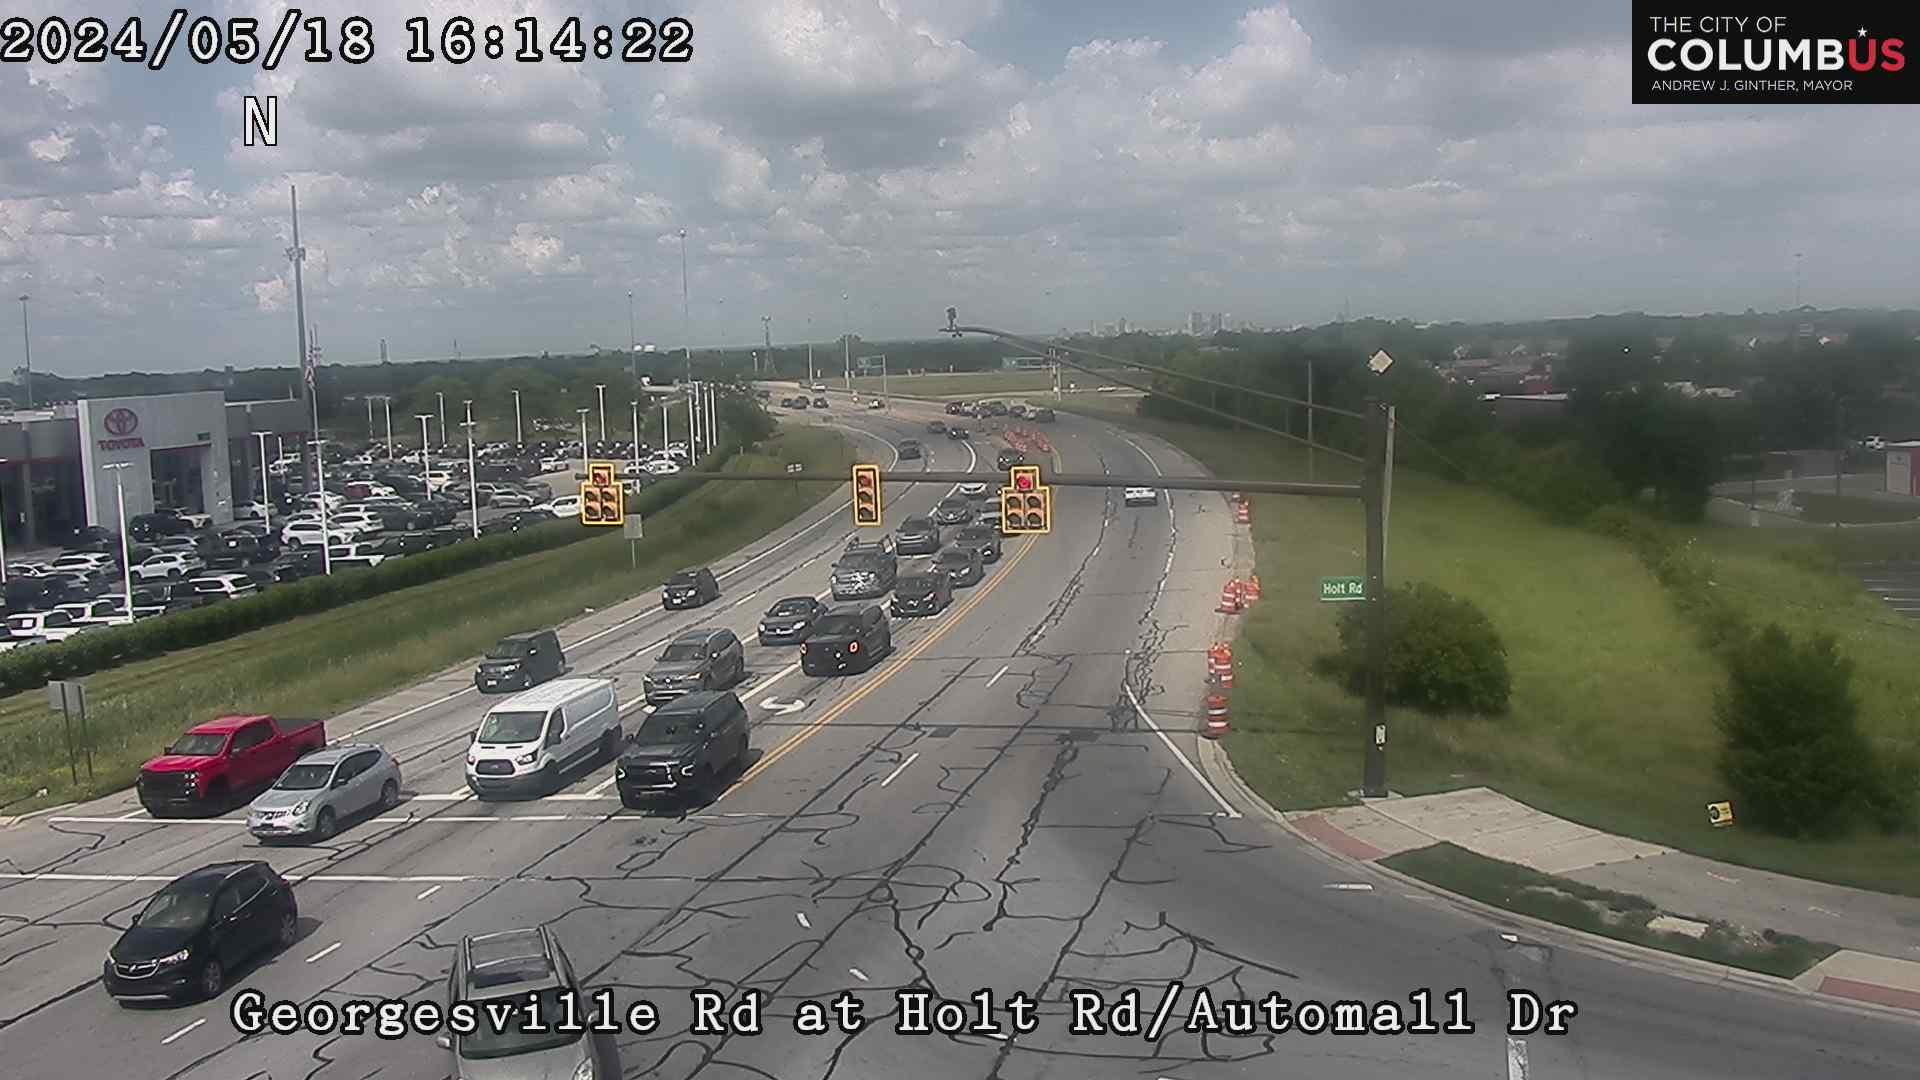 Traffic Cam Columbus: City of - Georgesville Rd at Holt Rd